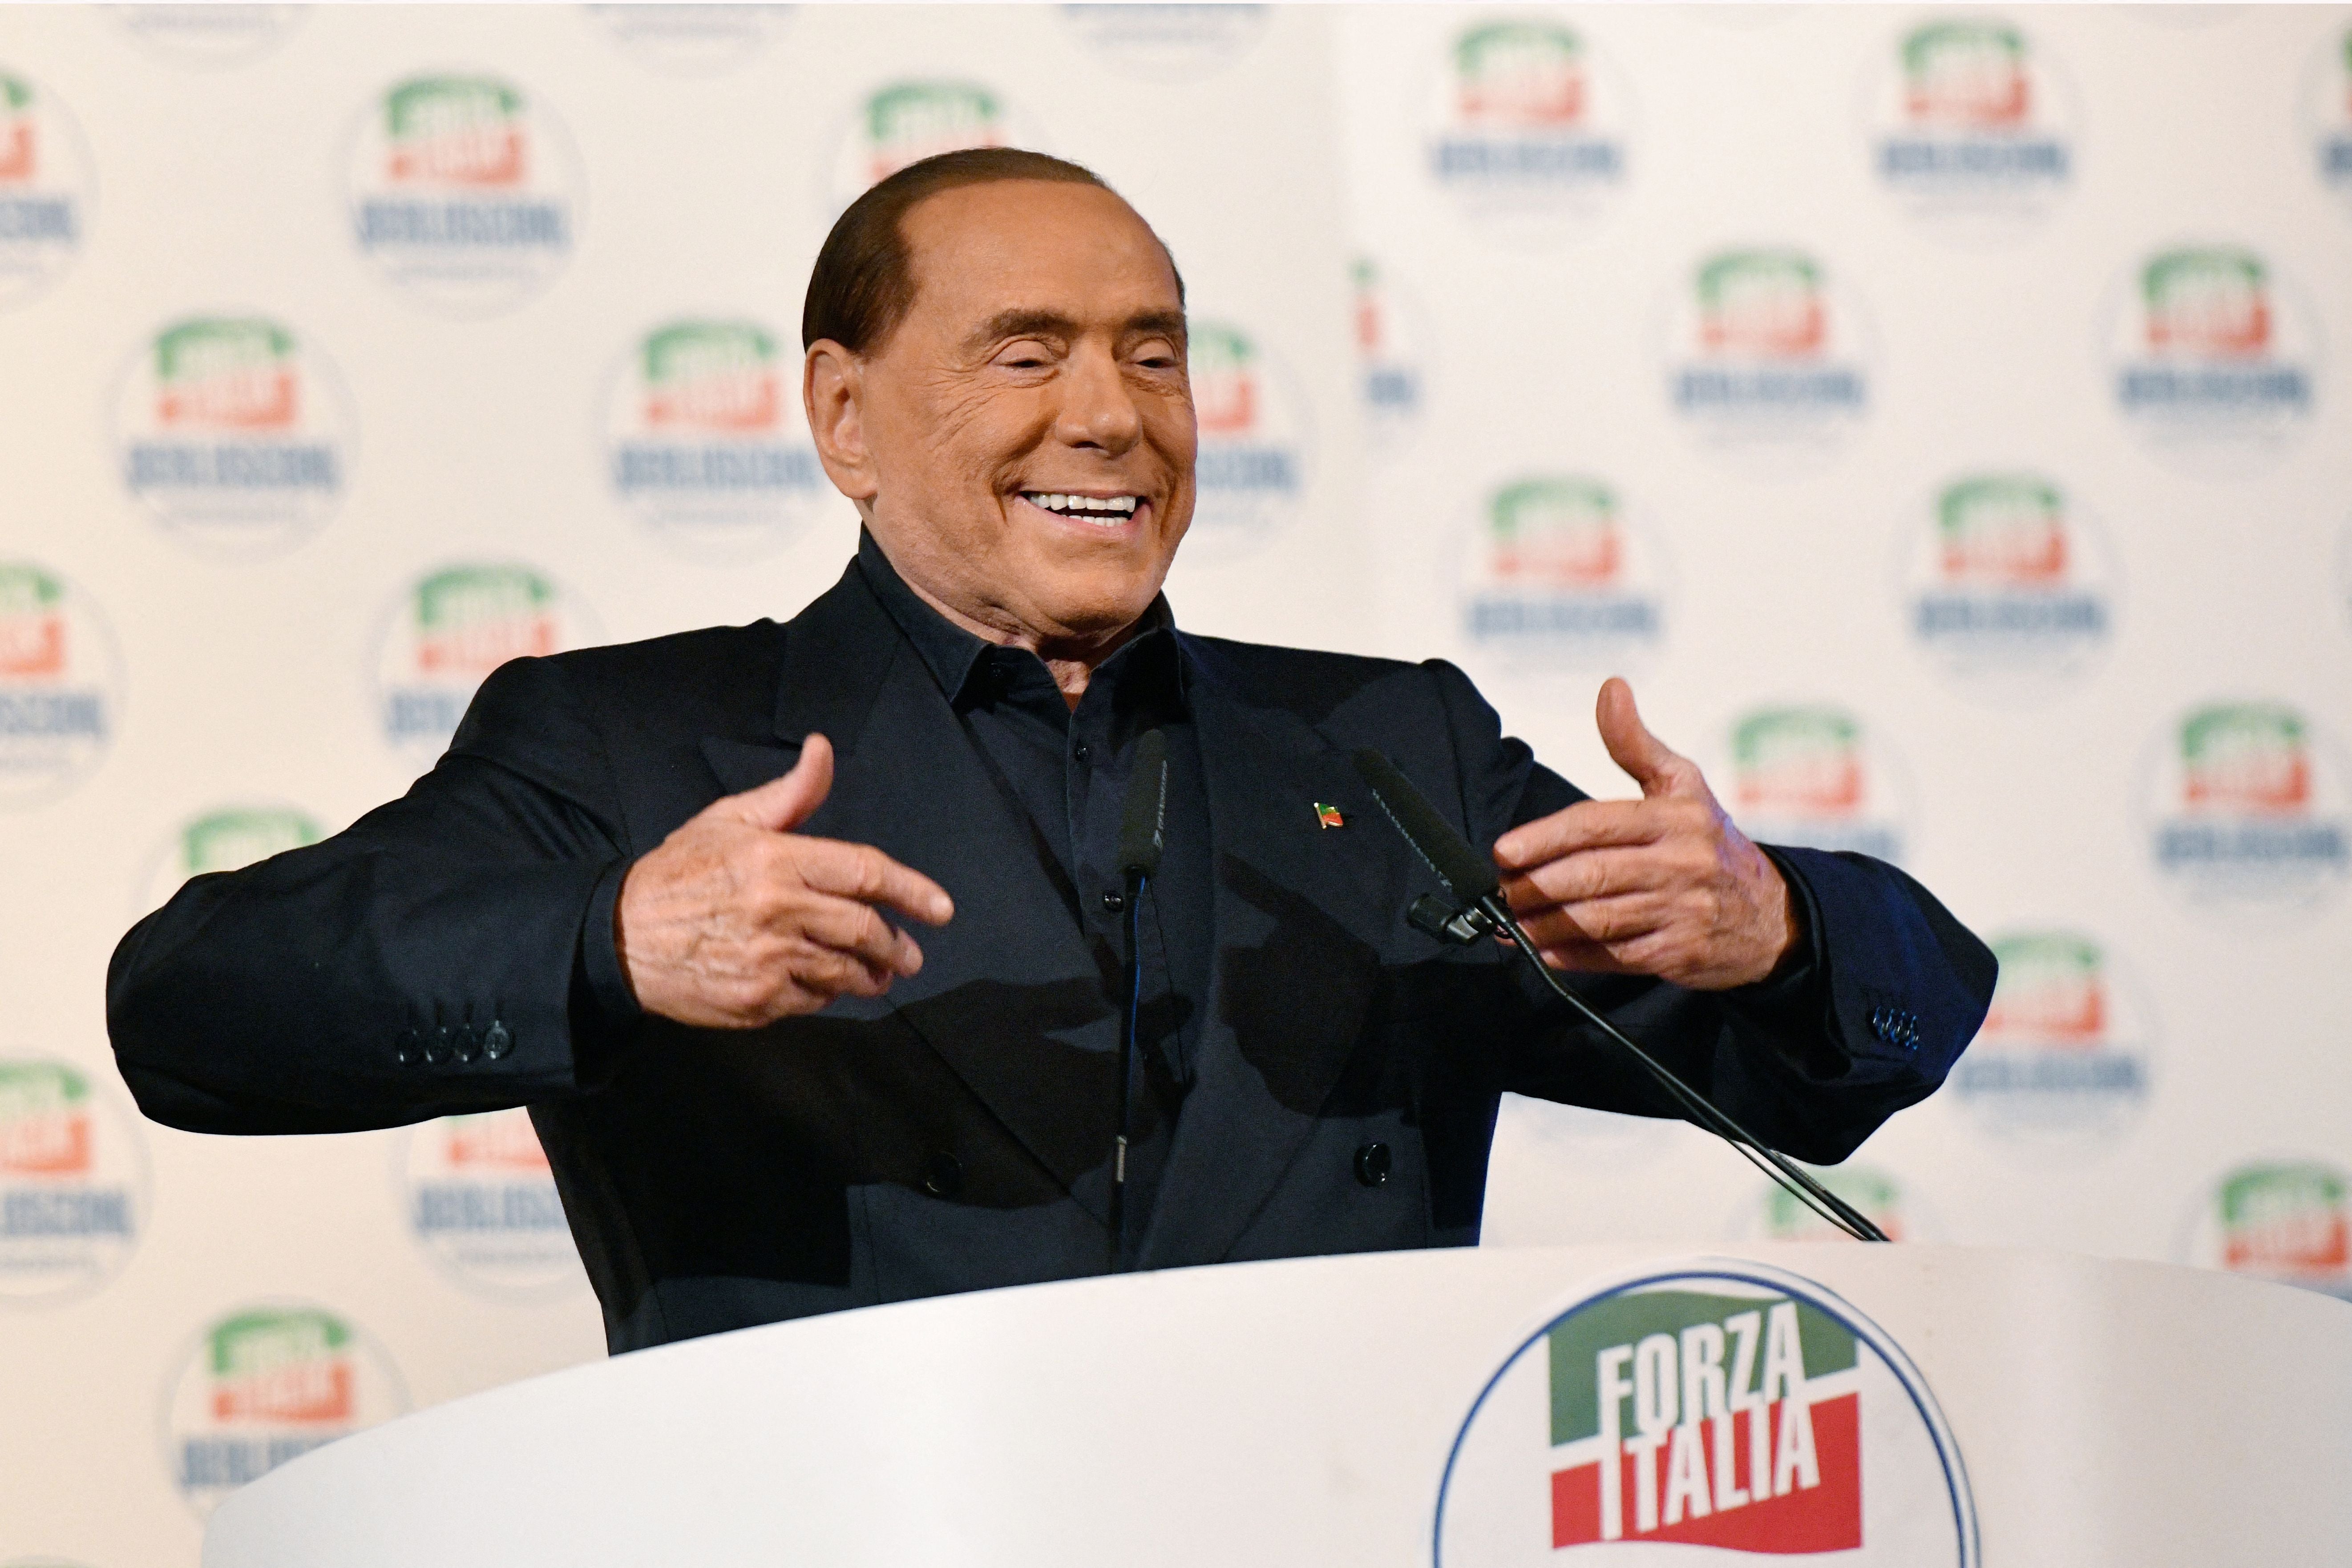 Silvio Berlusconi delivers a speech on stage during a campaign rally in Milan in 2018